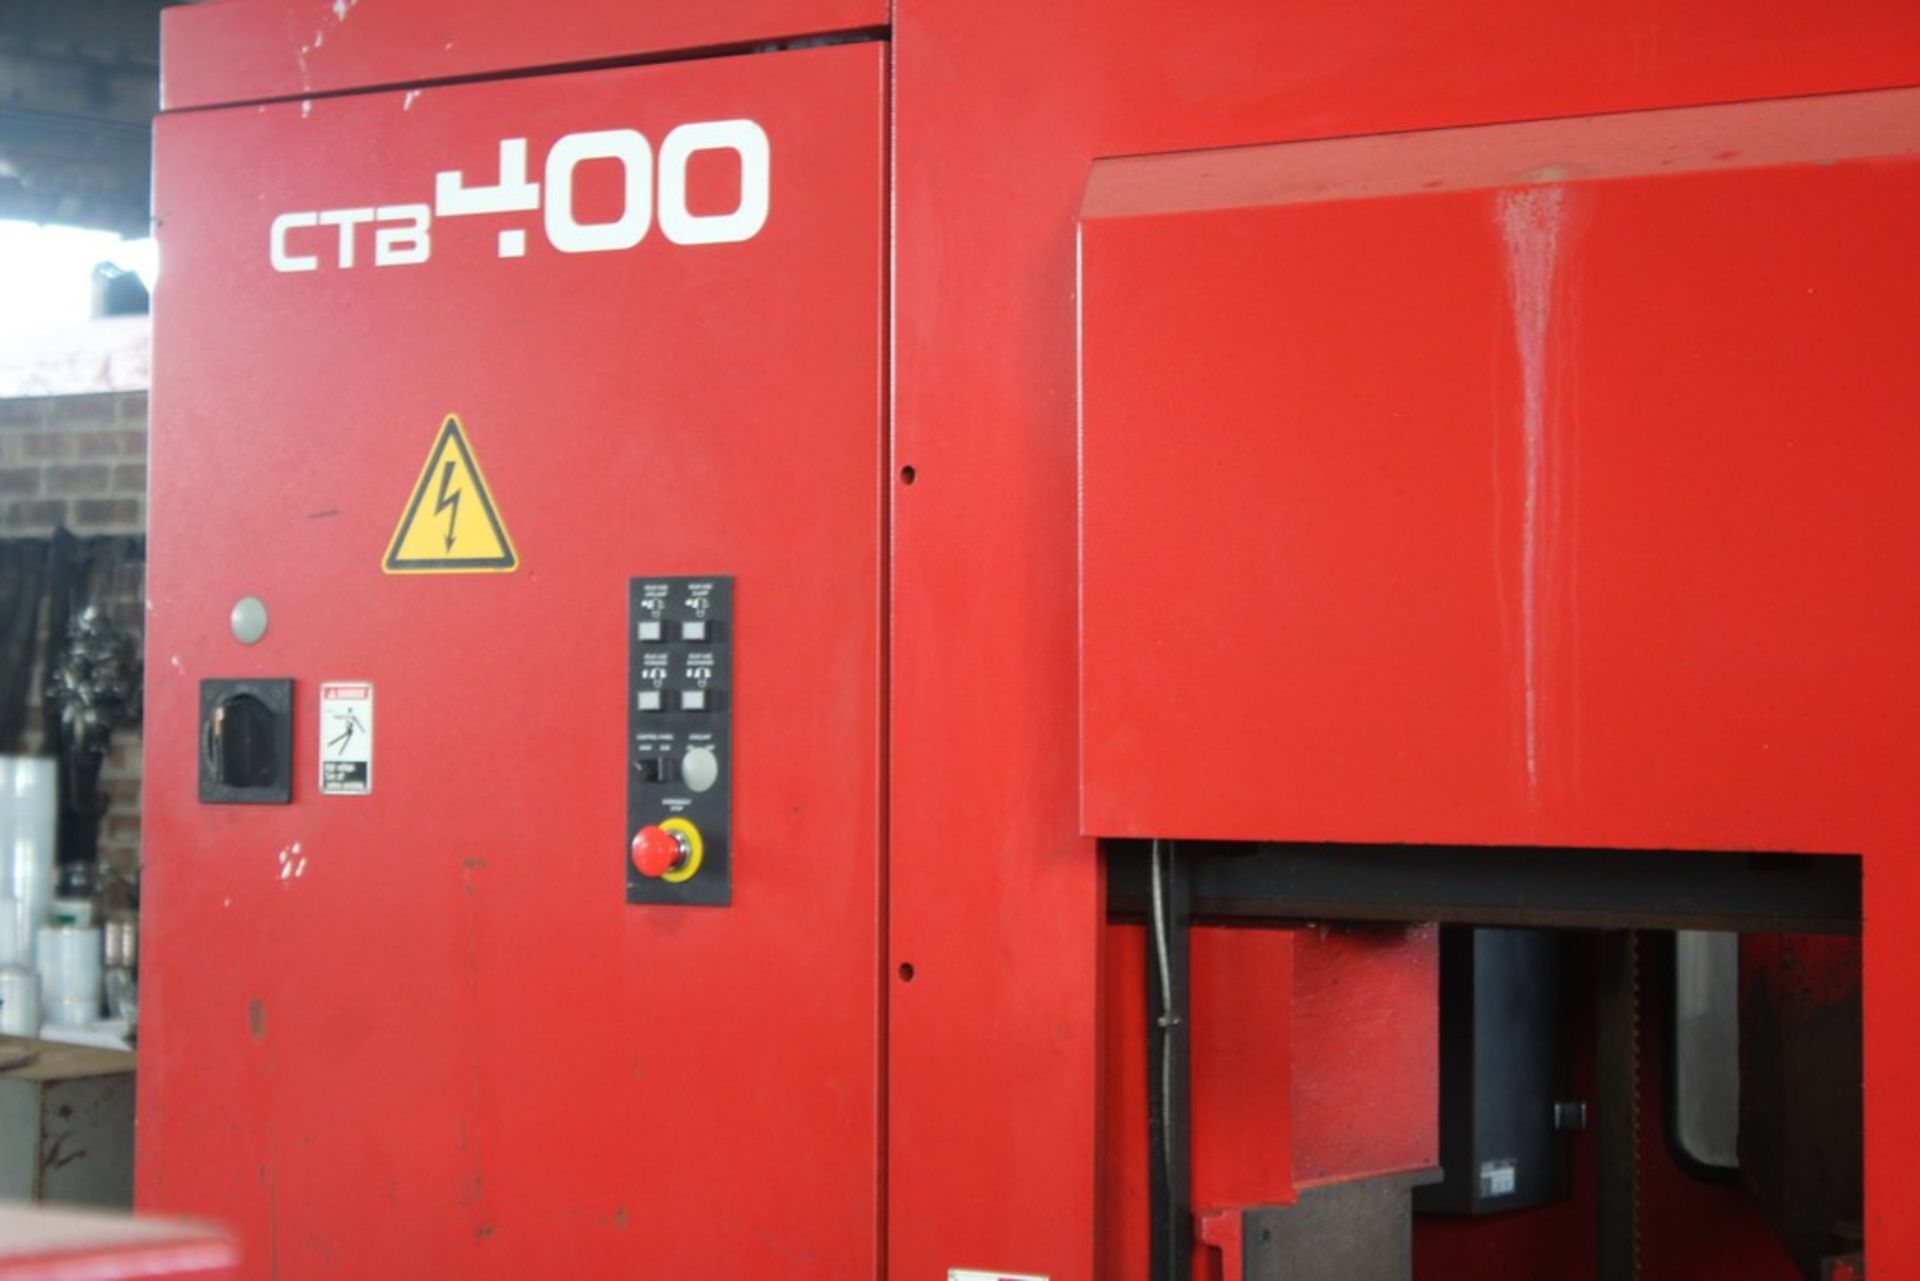 16.9" AMADA CTB400 CNC VERTICAL CARBIDE BAND SAW, S/N 40850029 (1998), 1.18" TO 16.9", CUTTING - Image 5 of 5